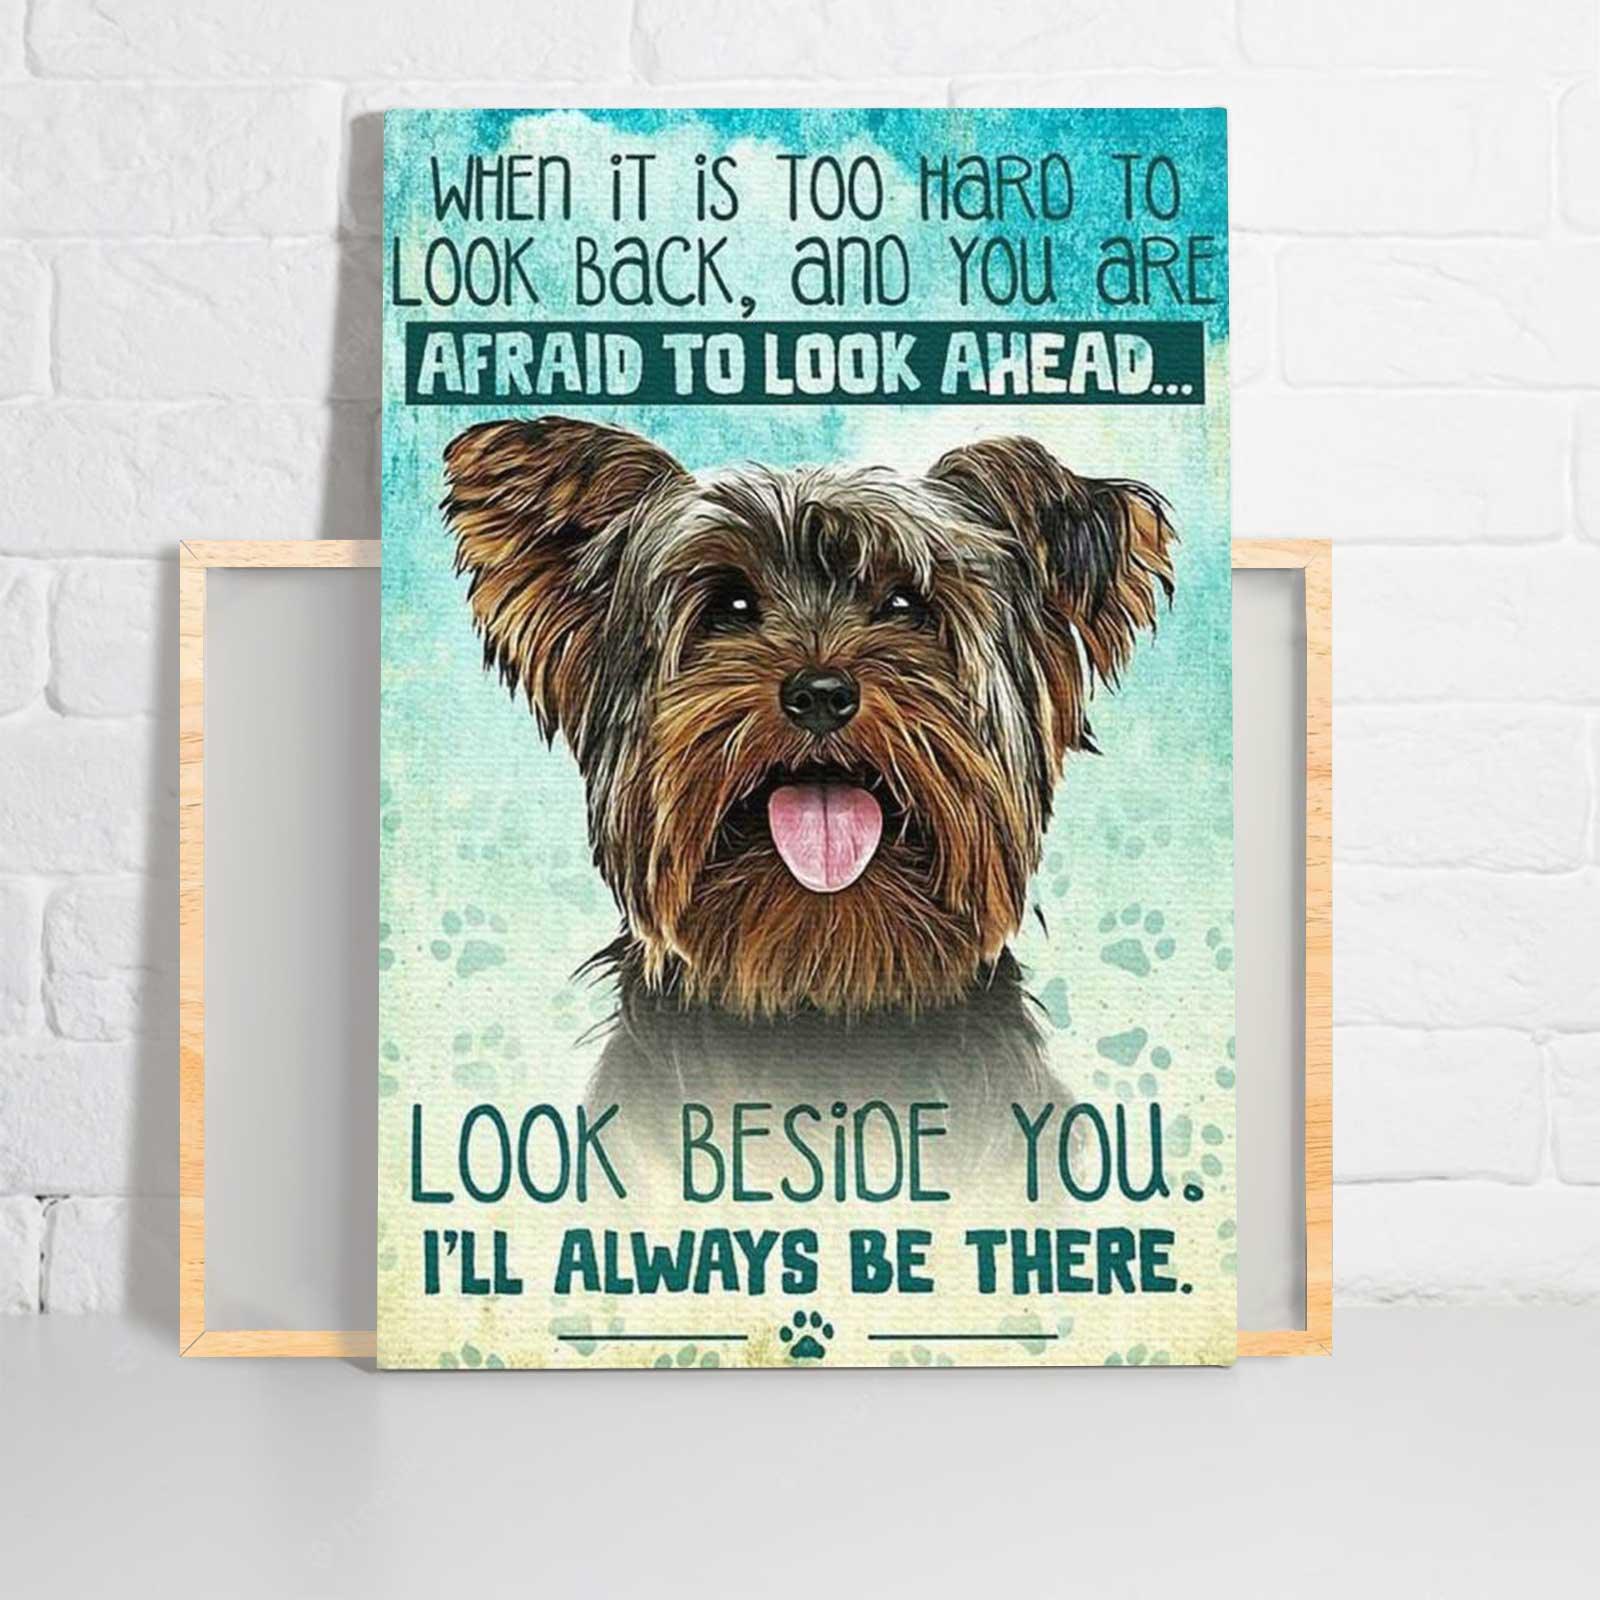 Yorkshire Terrier Portrait Premium Wrapped Canvas - Look Beside You I'll Always Be There - Gift For Family, Friends, Dog Lovers - Amzanimalsgift